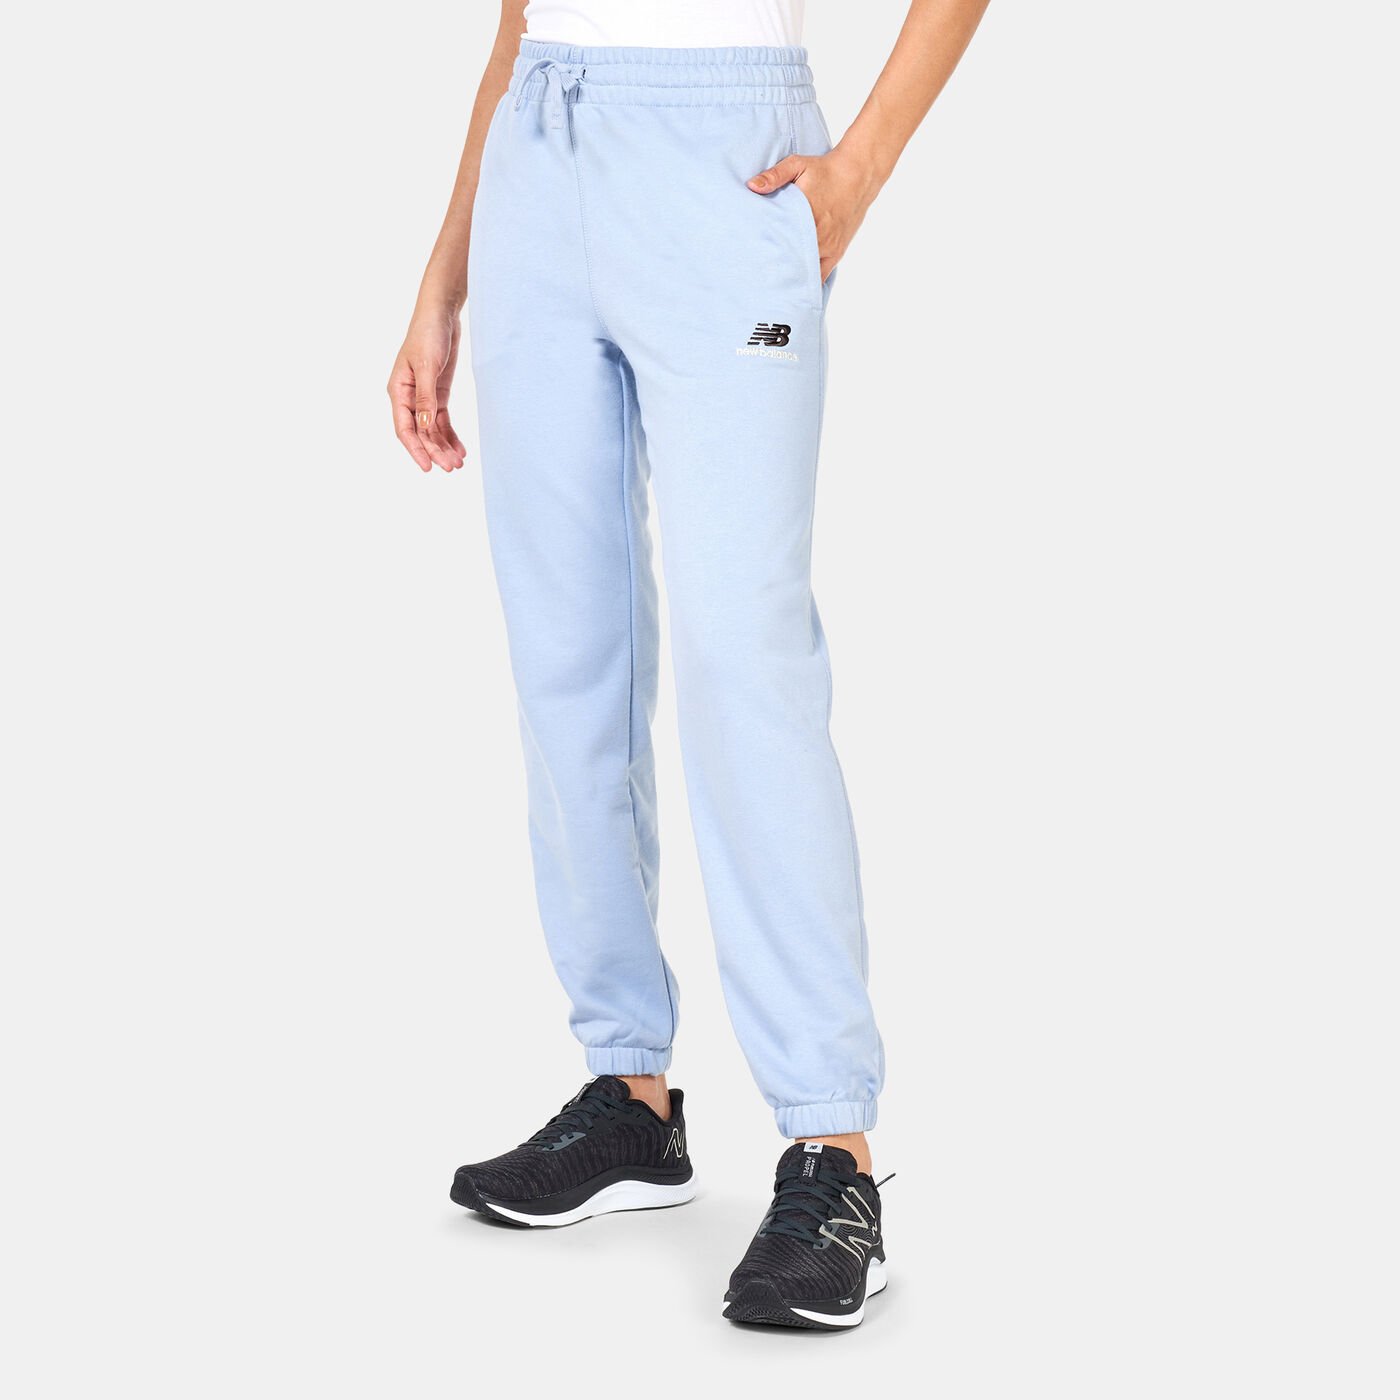 Uni-ssentials French Terry Sweatpants